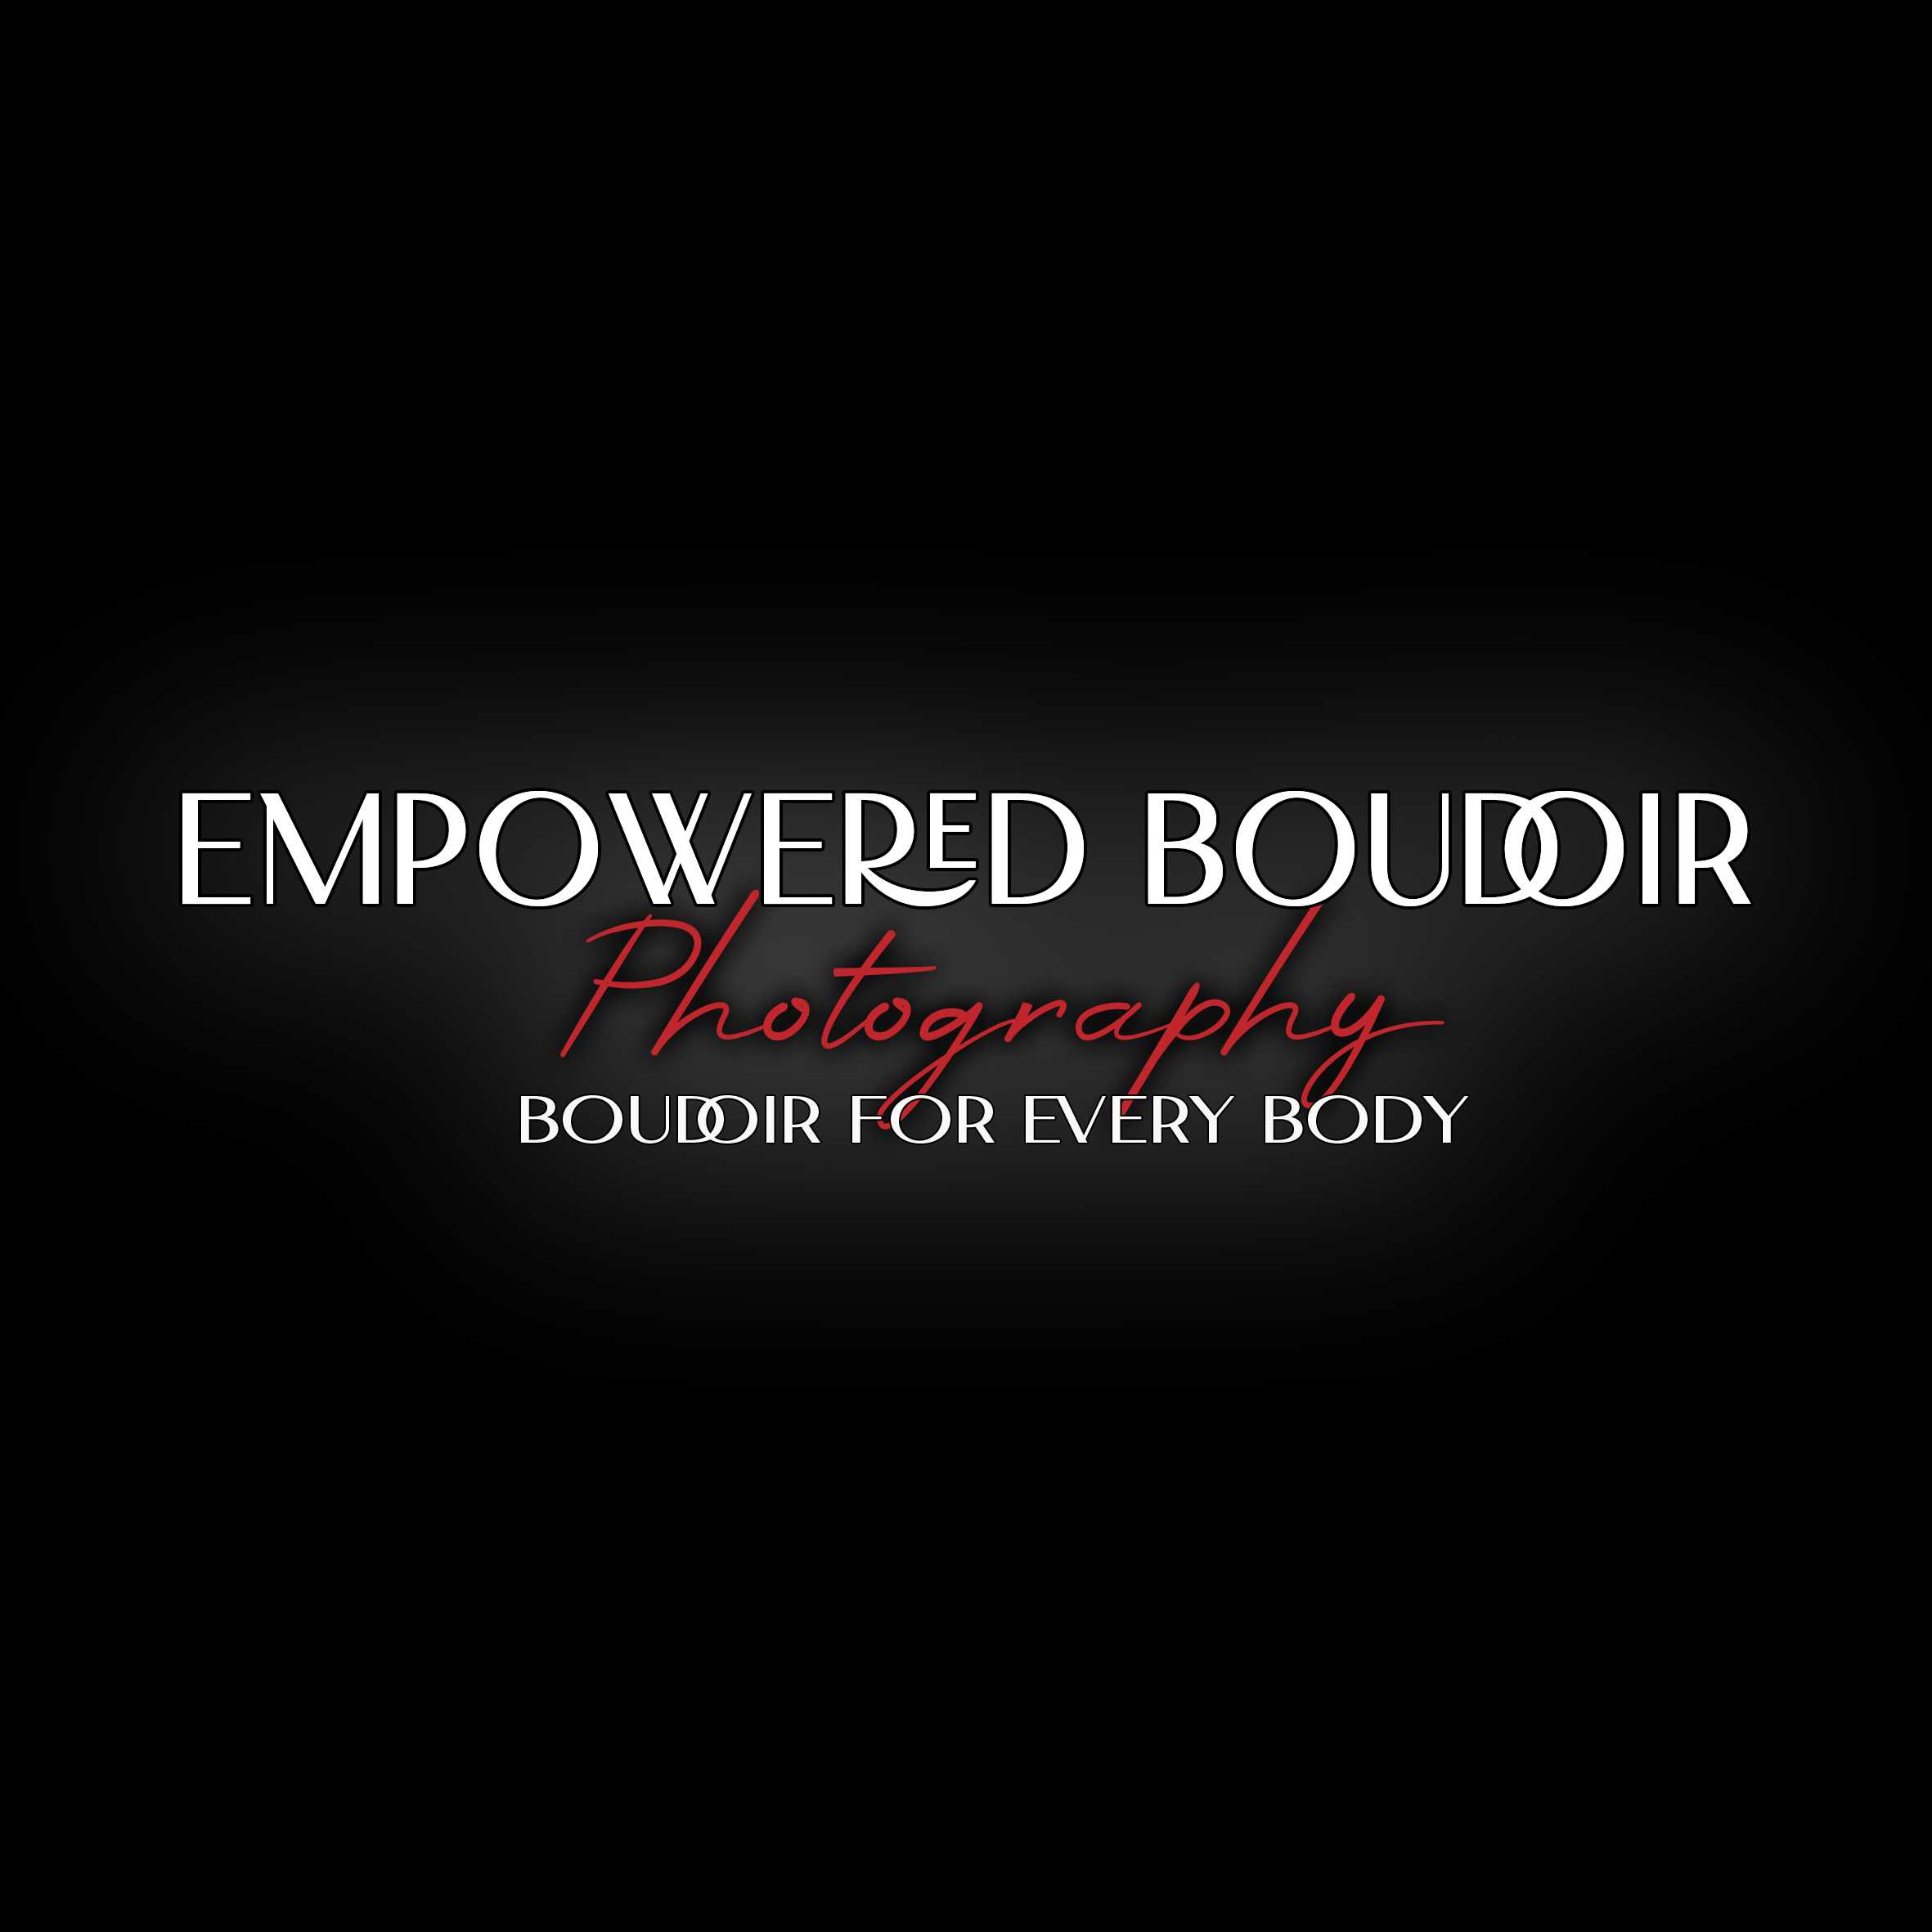 Empowered Boudoir Photography